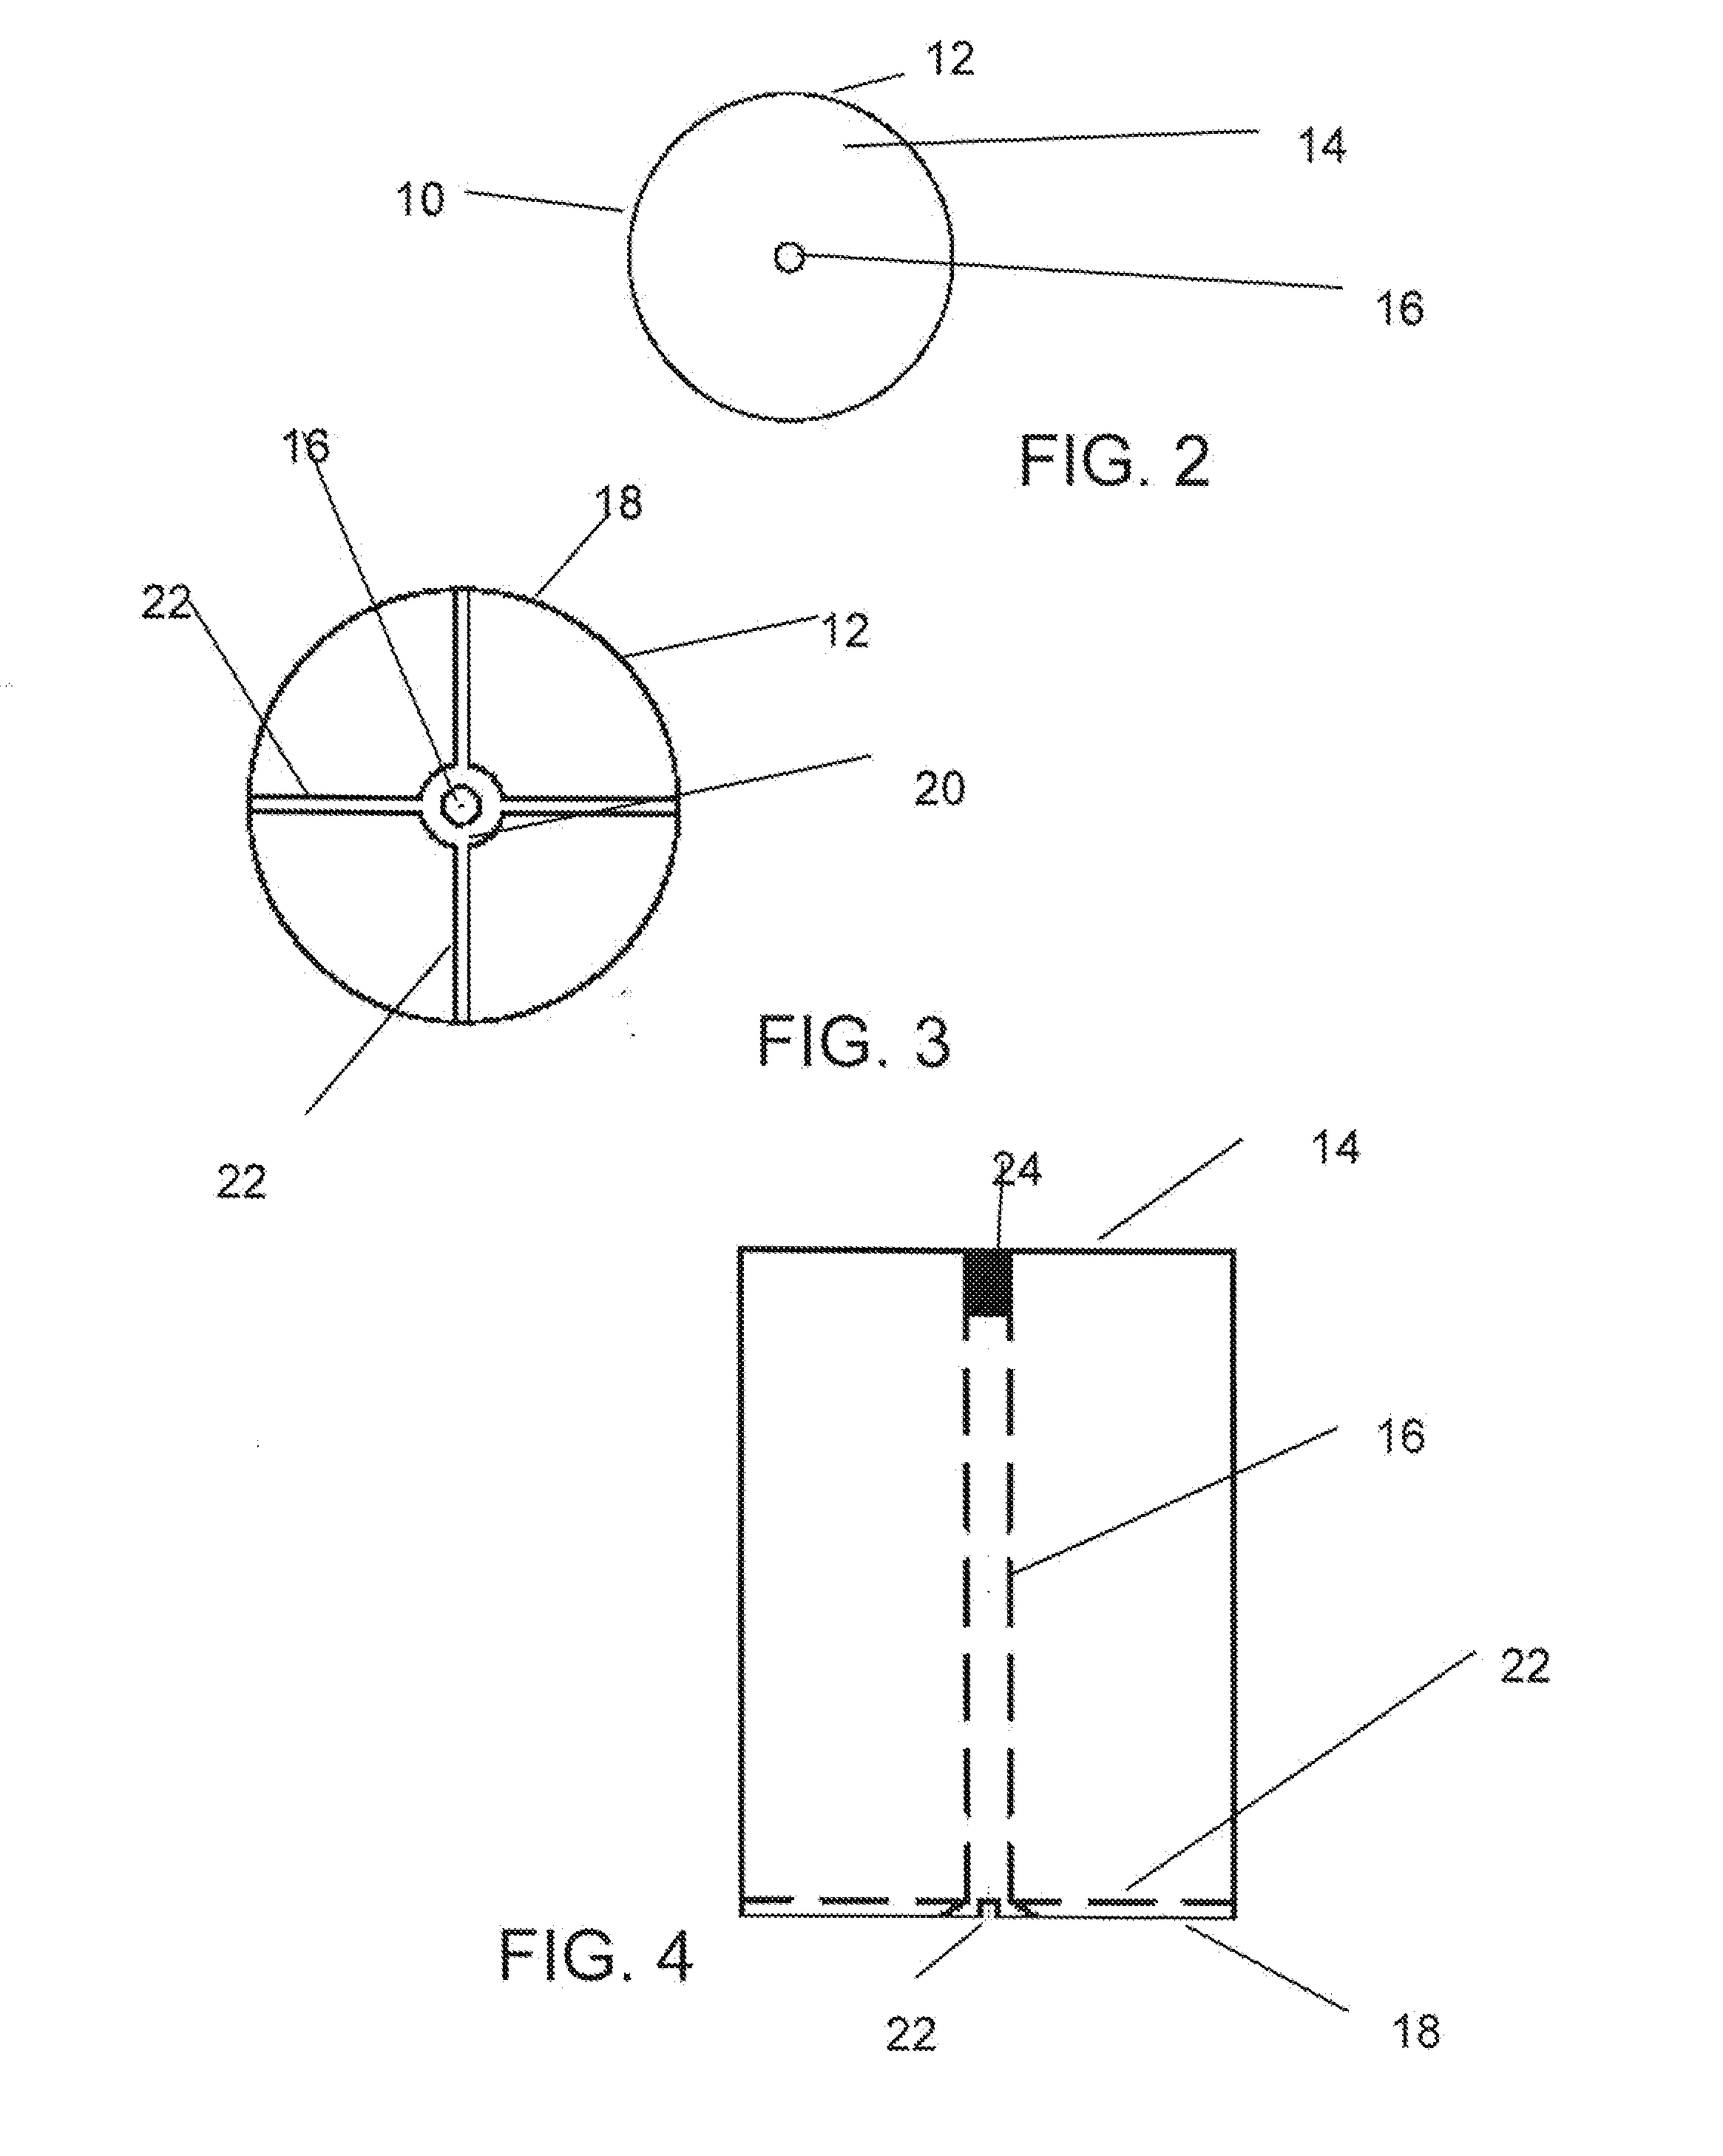 Accumulator Insert for Use With A Composite Sampling System